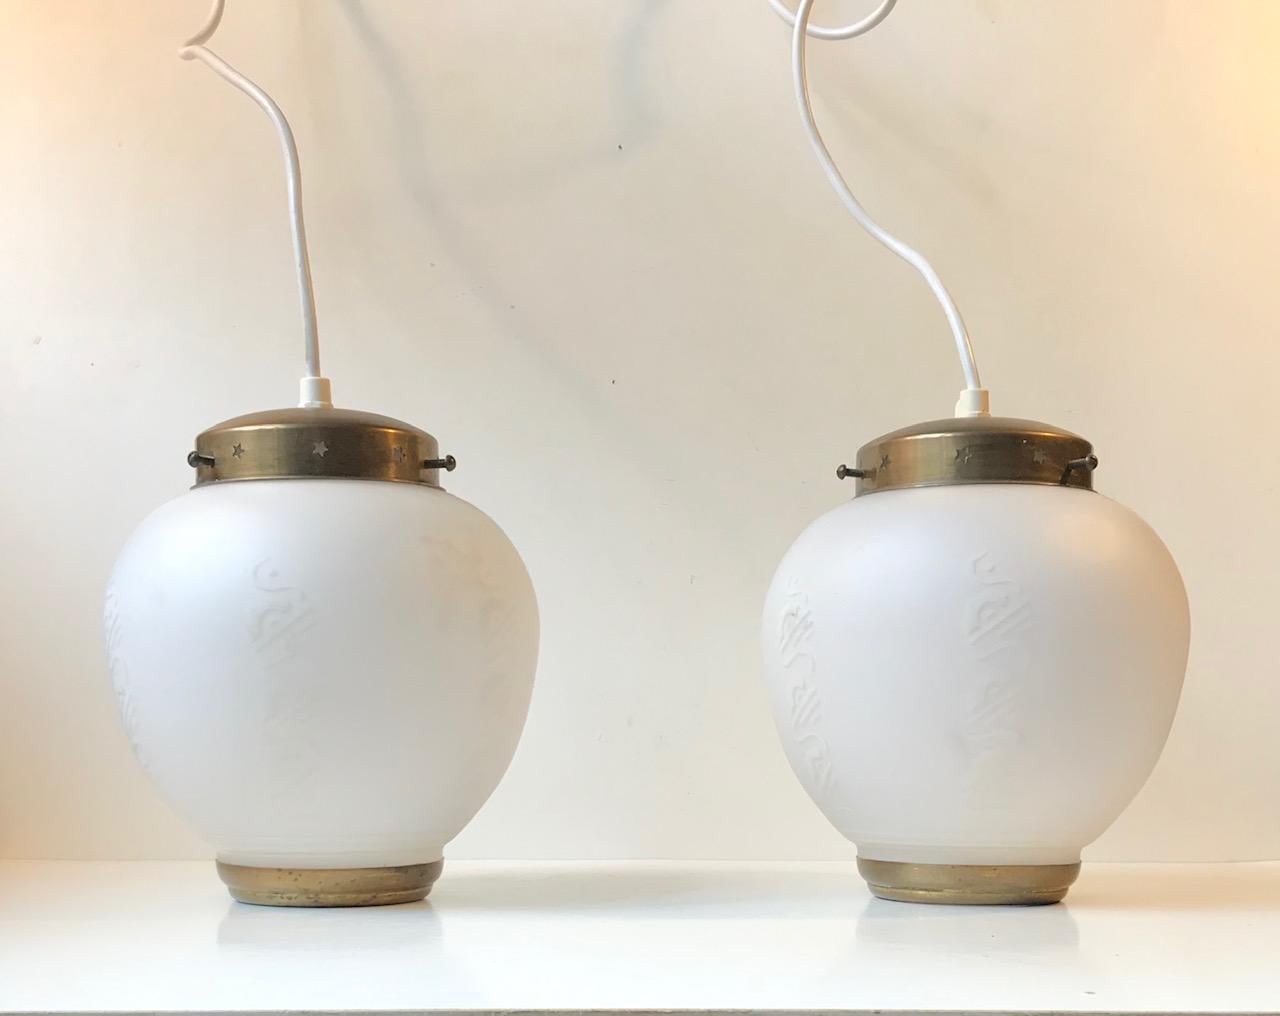 A pair of Scandinavian ceiling lights manufactured and designed during the 1950s. Probably by Lyfa in Denmark. However they remain unattributed. They are made from patinated brass and have a center shade in partially decorated white milk or opaline